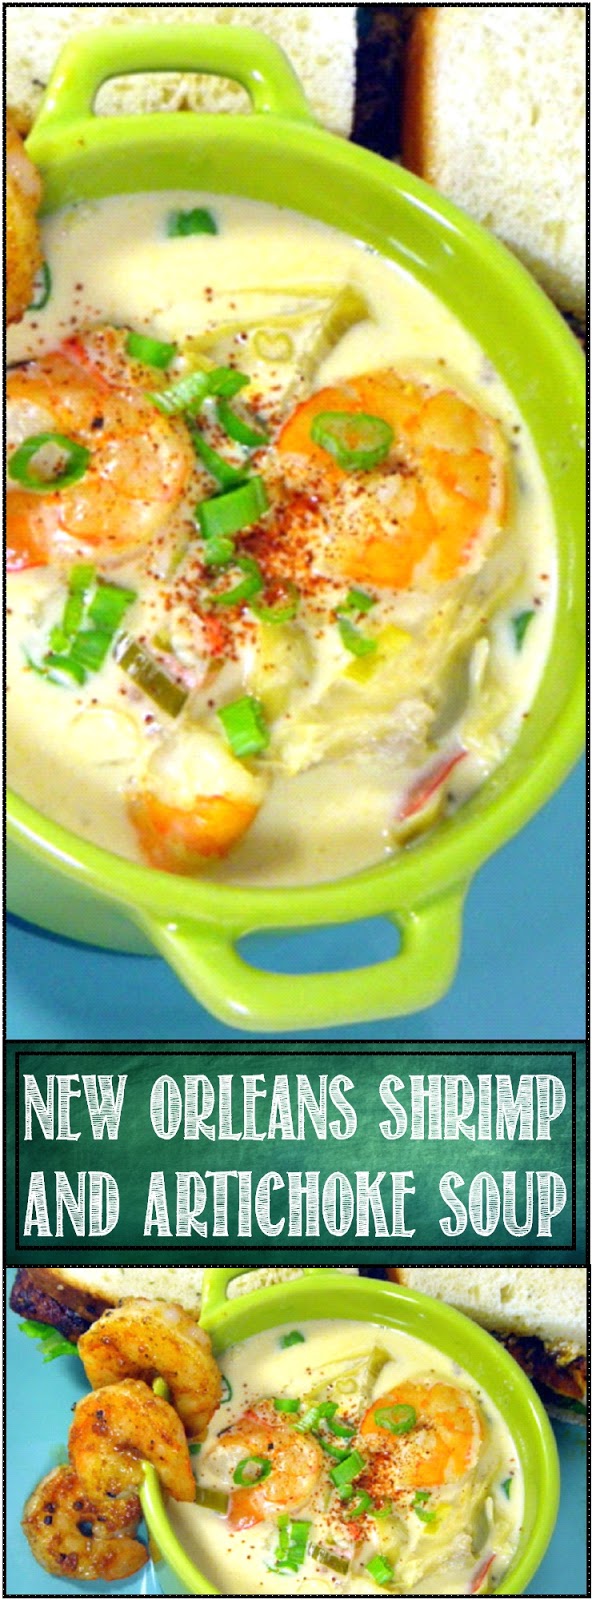 52 Ways to Cook: New Orleans SHRIMP and ARTICHOKE SOUP